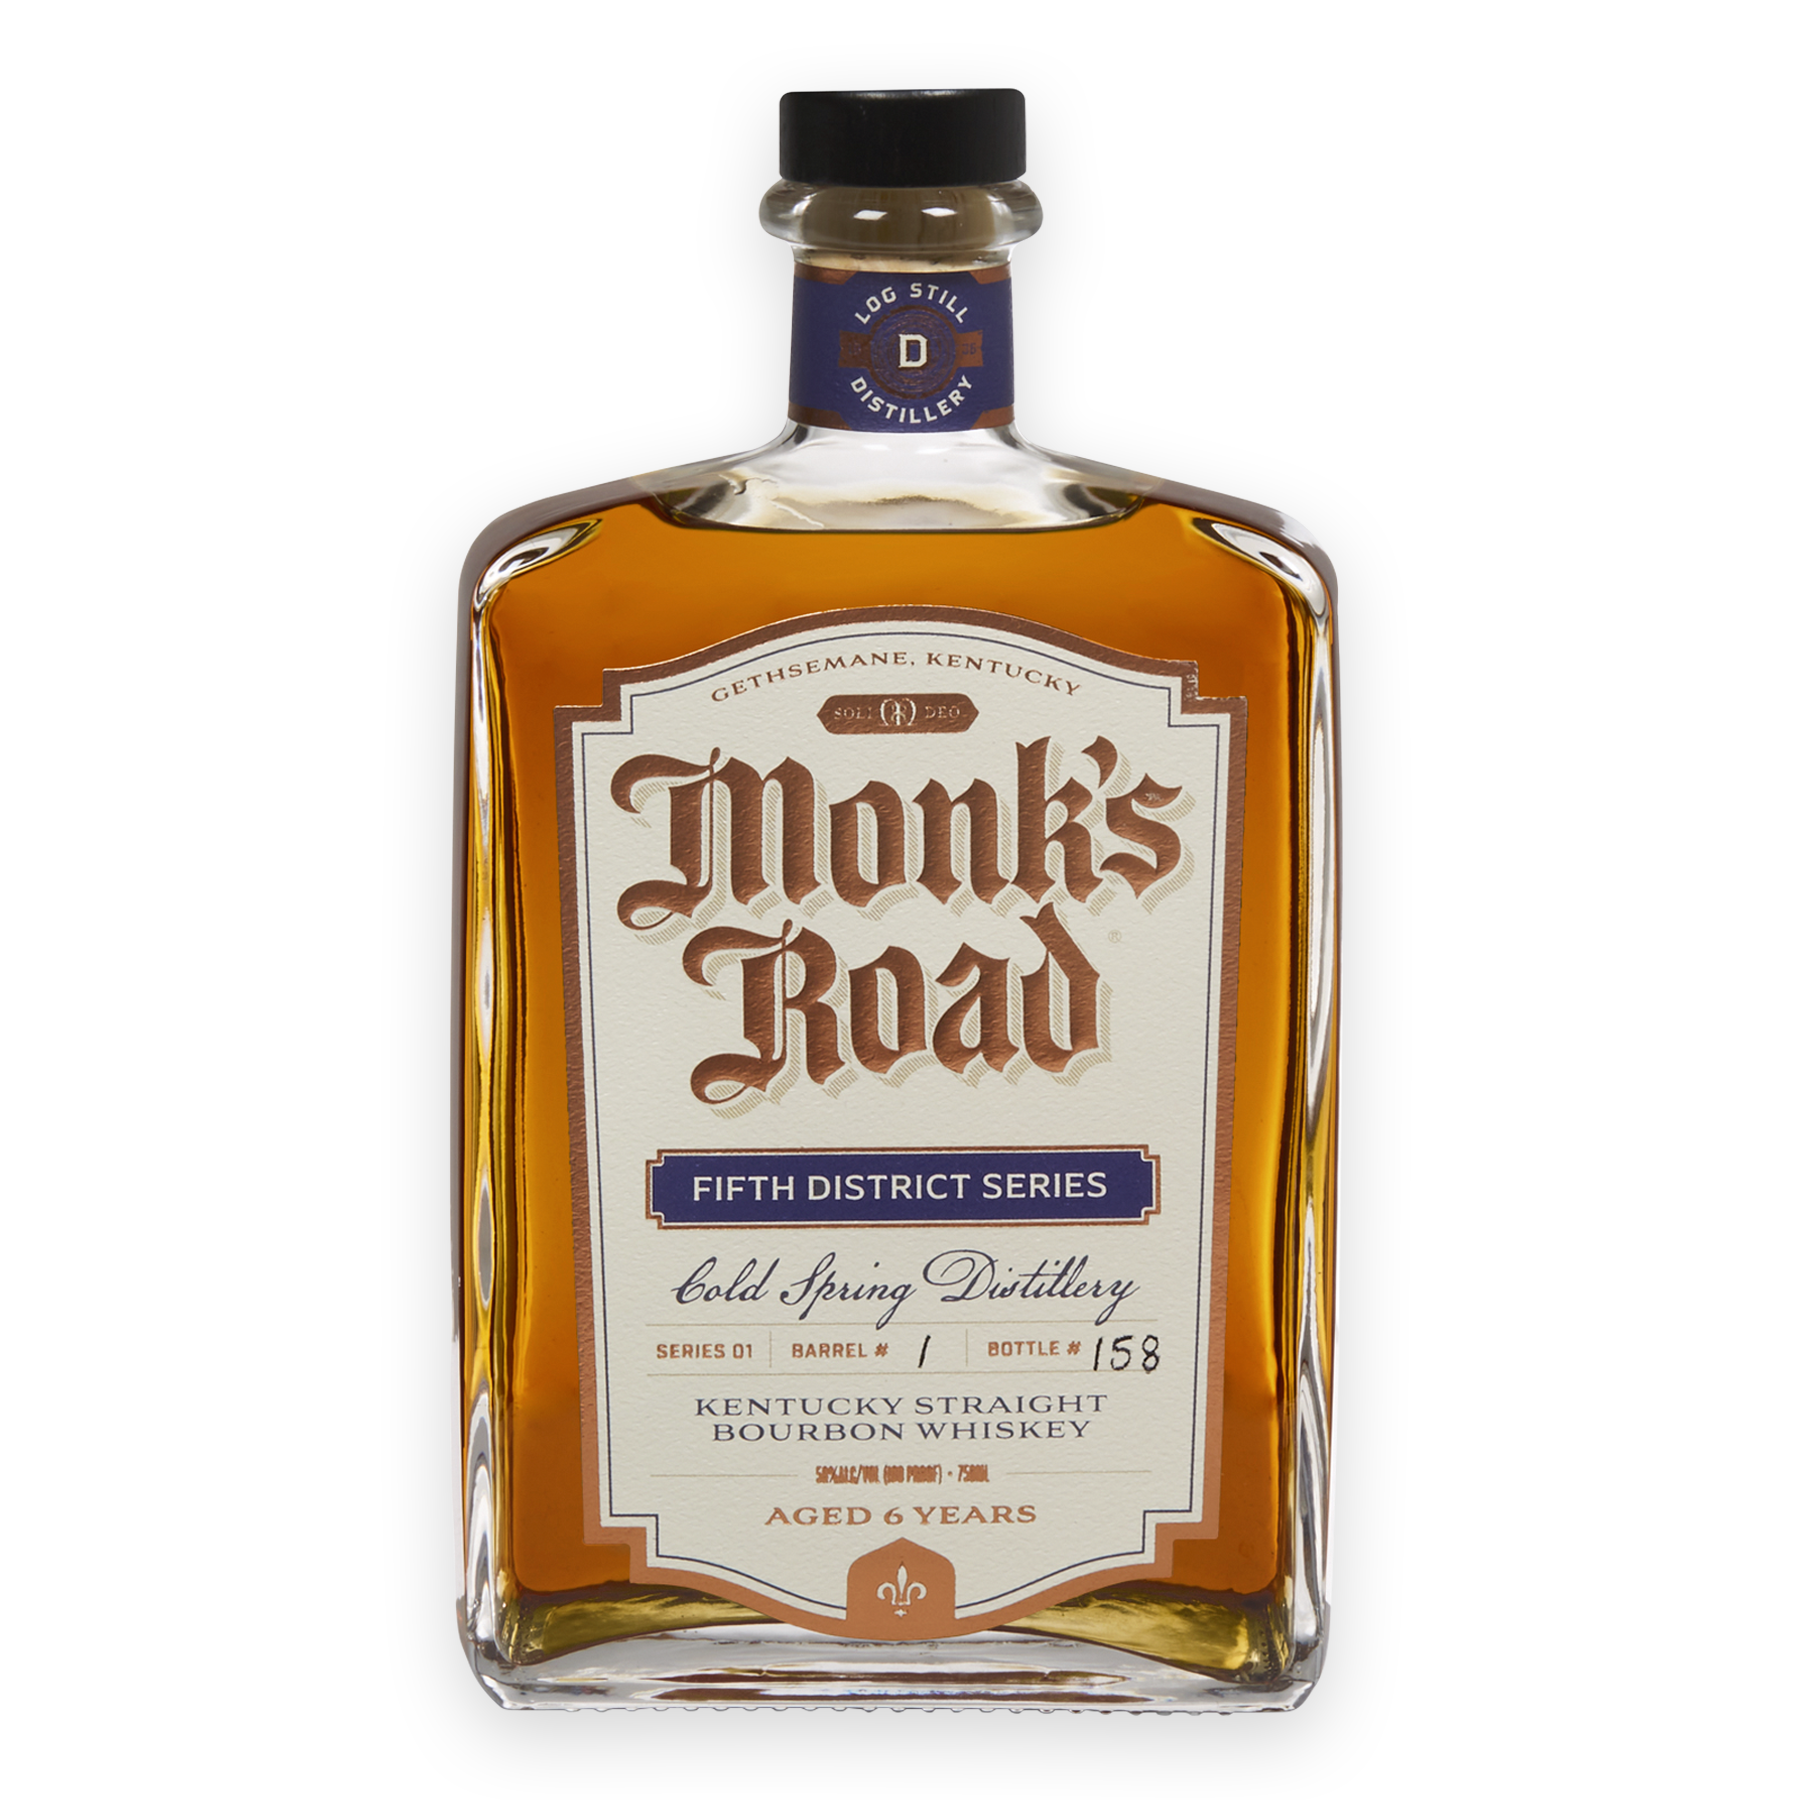 Monk's Road Fifth District Series bottle